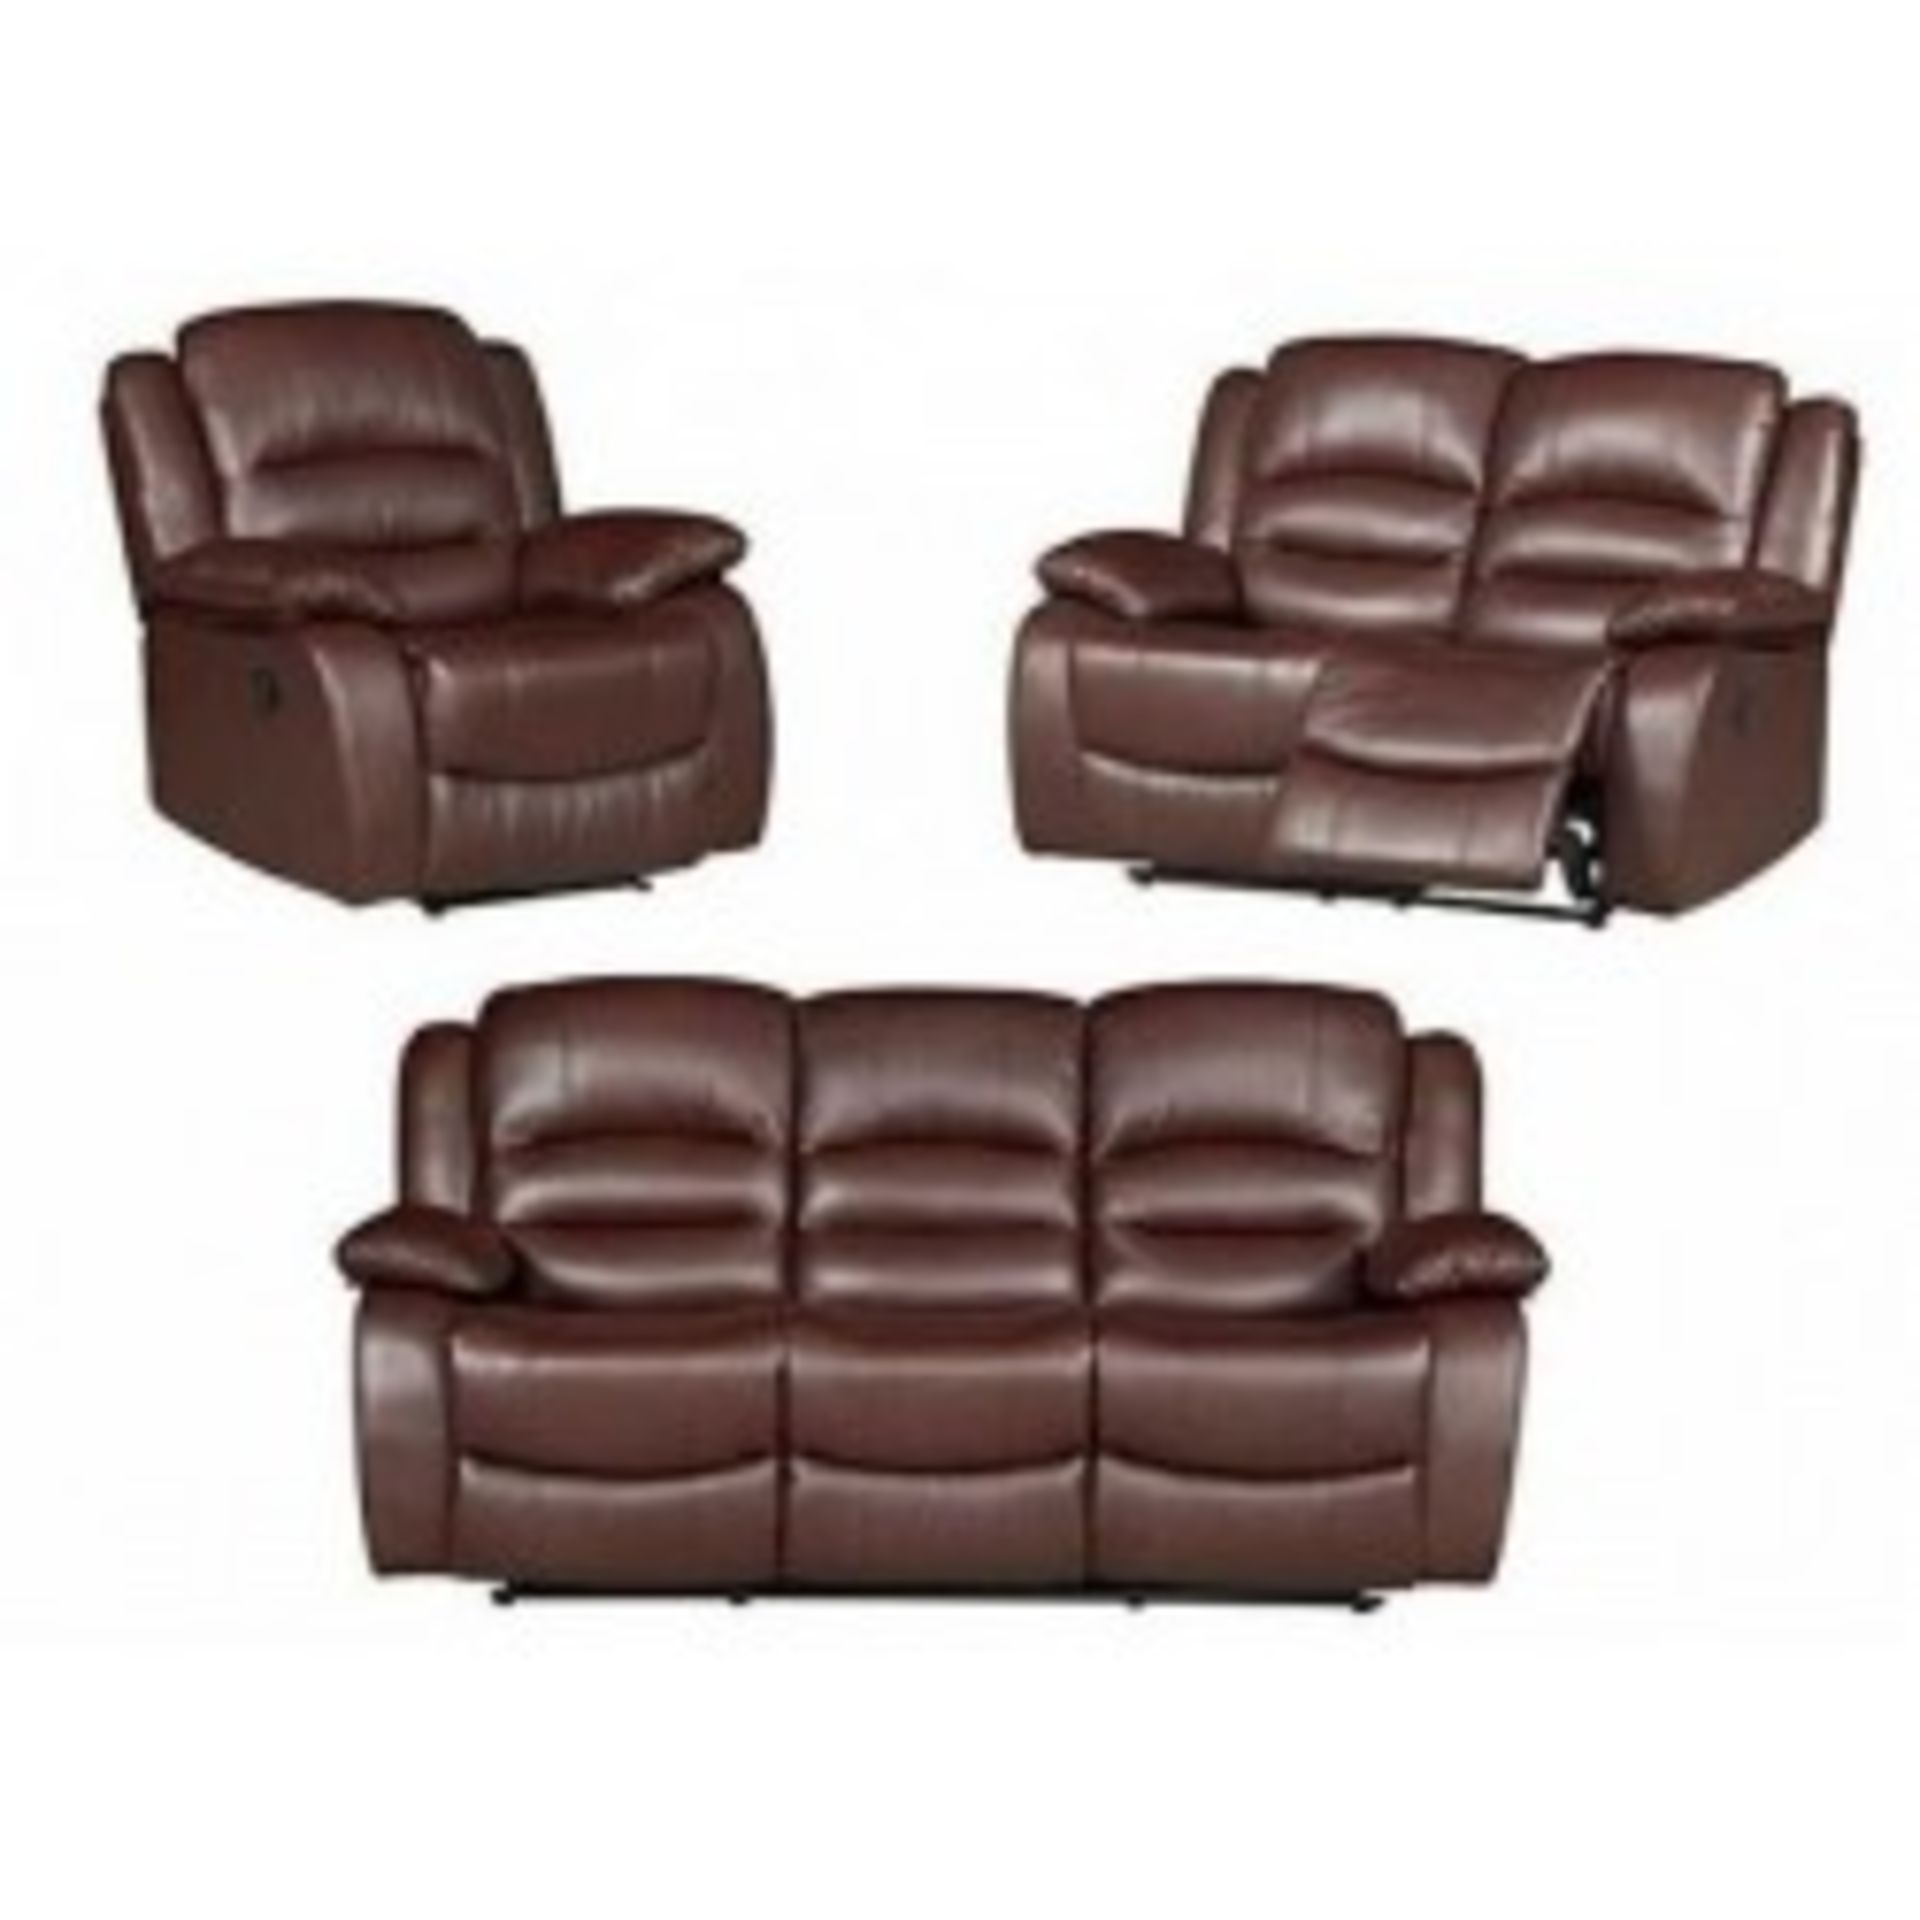 Brand new boxed direct from the manufacturers Boston oxblood burgandy leather air reclining corner